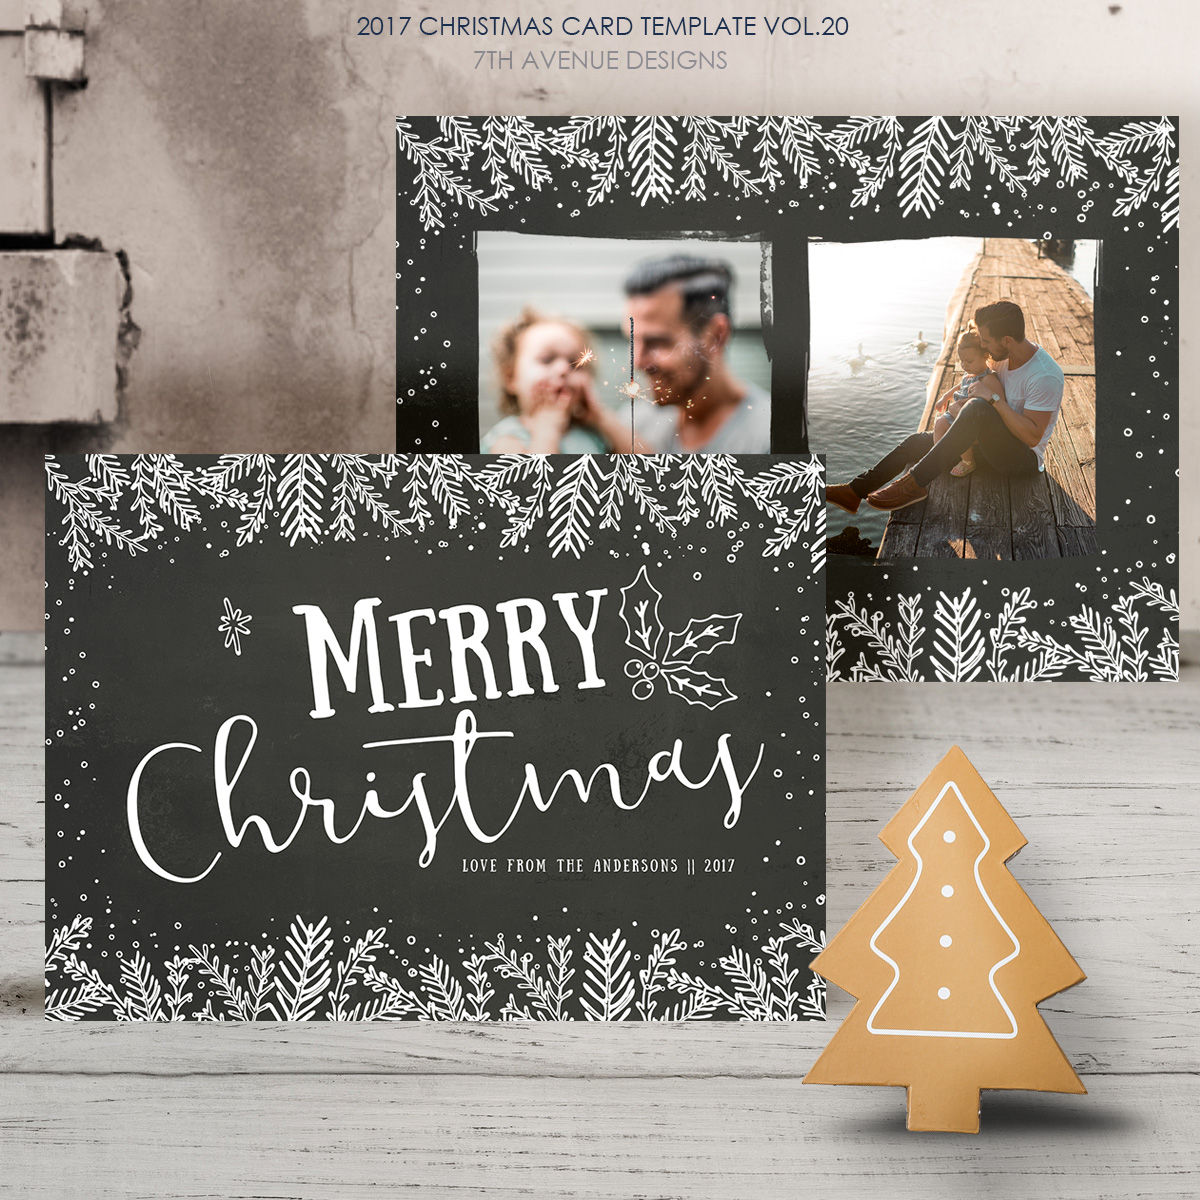 Holiday Cards : 7Thavenue Designs :: Logo And Templates Within Holiday Card Templates For Photographers